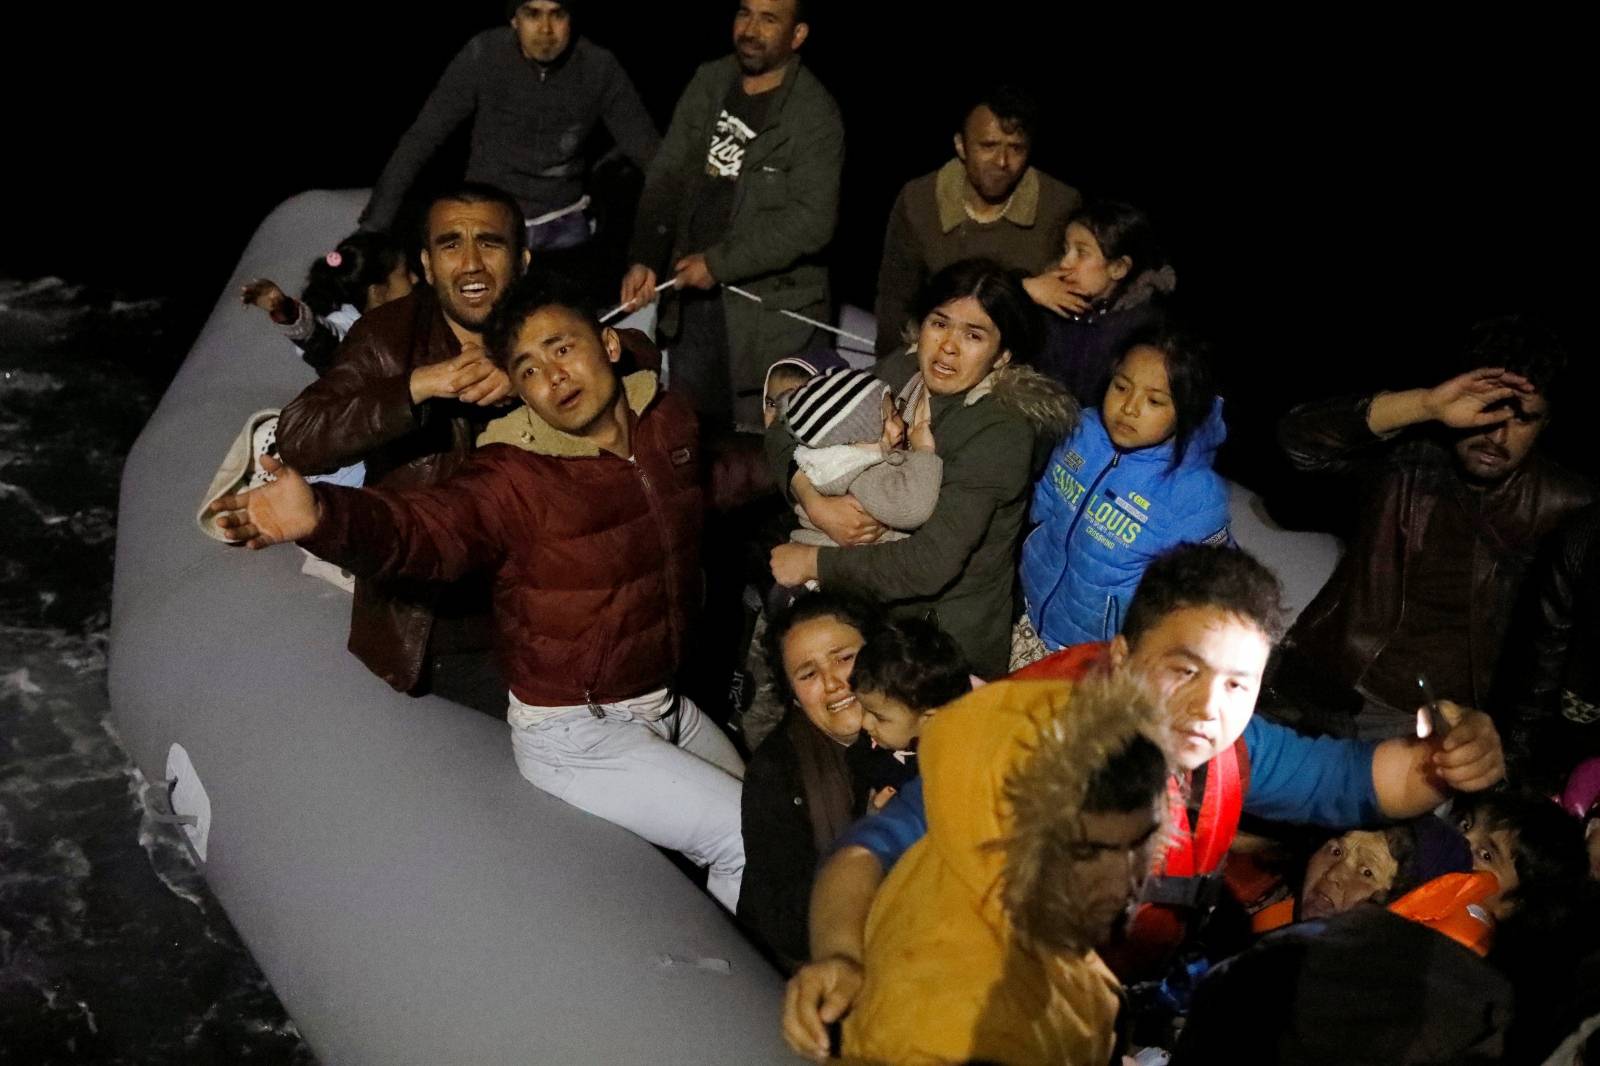 Migrants wave and shout for help, following a failed attempt to cross to the Greek island of Lesbos, as a Turkish Coast Guard boat aproaches them on the waters of the North Aegean Sea, off the shores of Canakkale